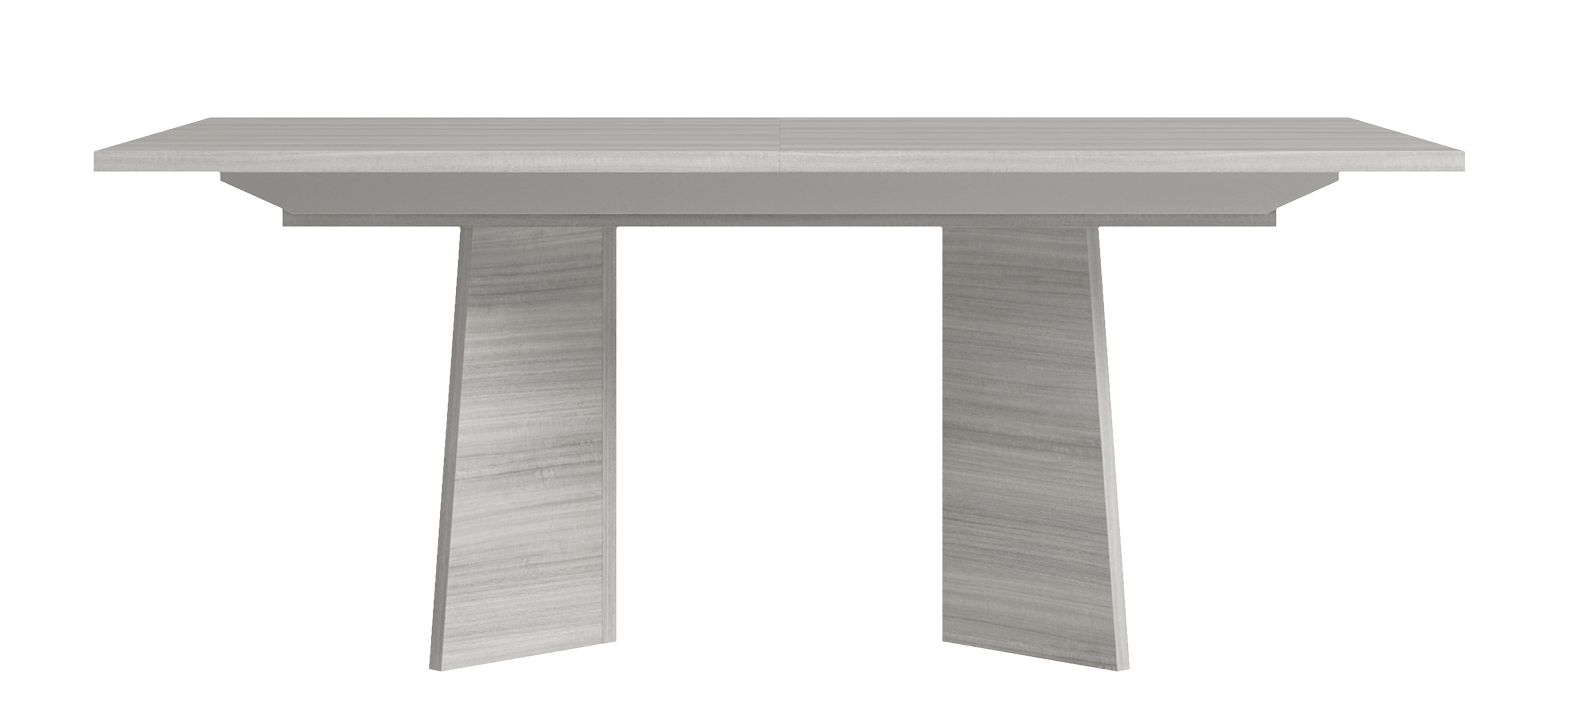 Brands Arredoclassic Dining Room, Italy Mia Dining Table